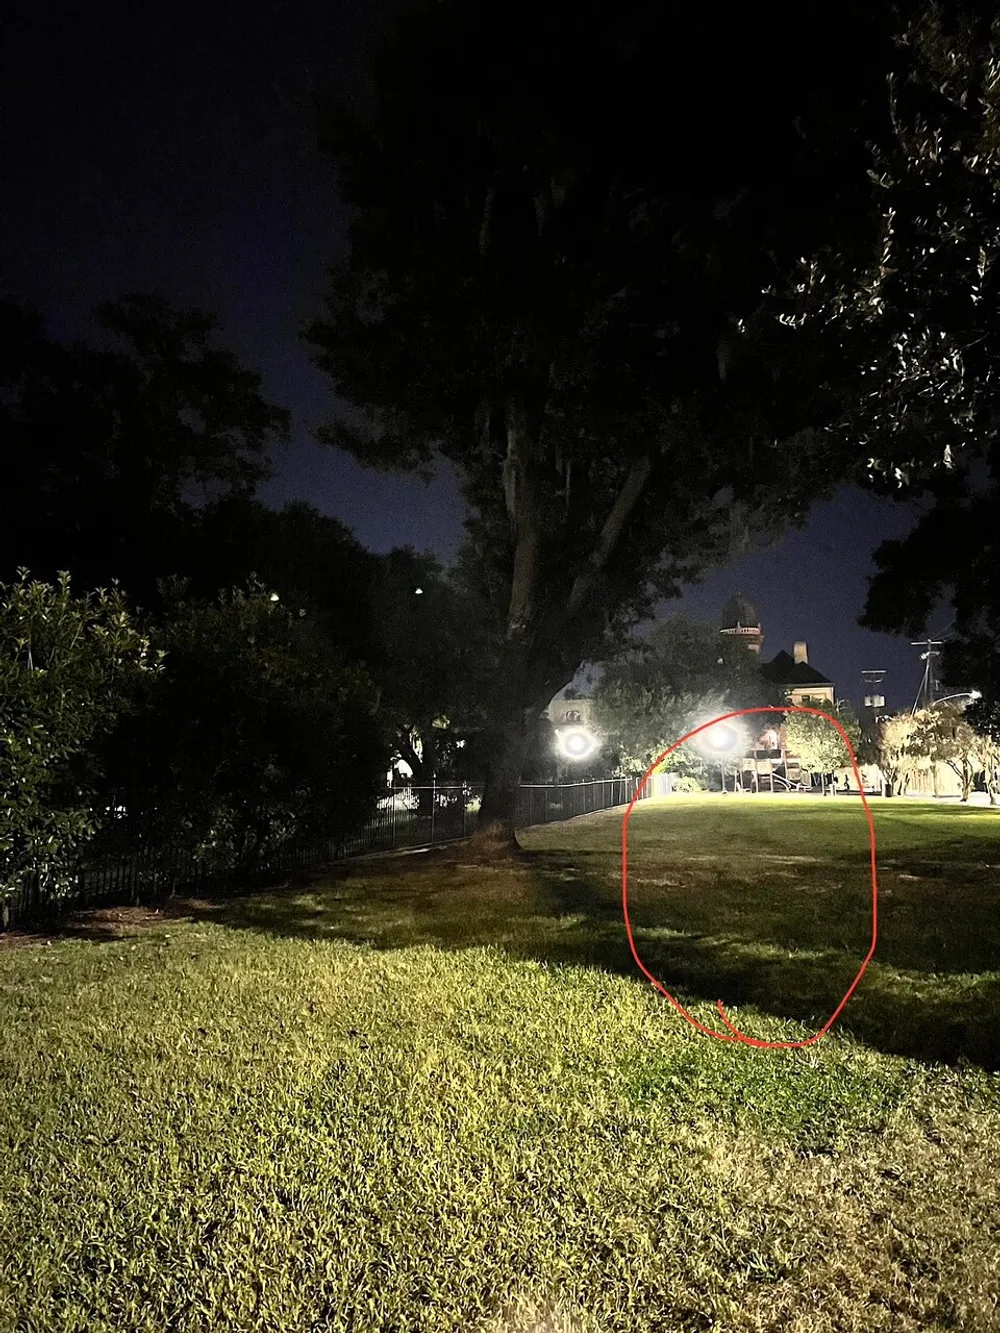 The image shows a nighttime scene of a park with a large tree on the left a grassy area in the foreground and a building with a domed roof in the background with a section of the photo circled in red potentially to highlight something specific within the scene